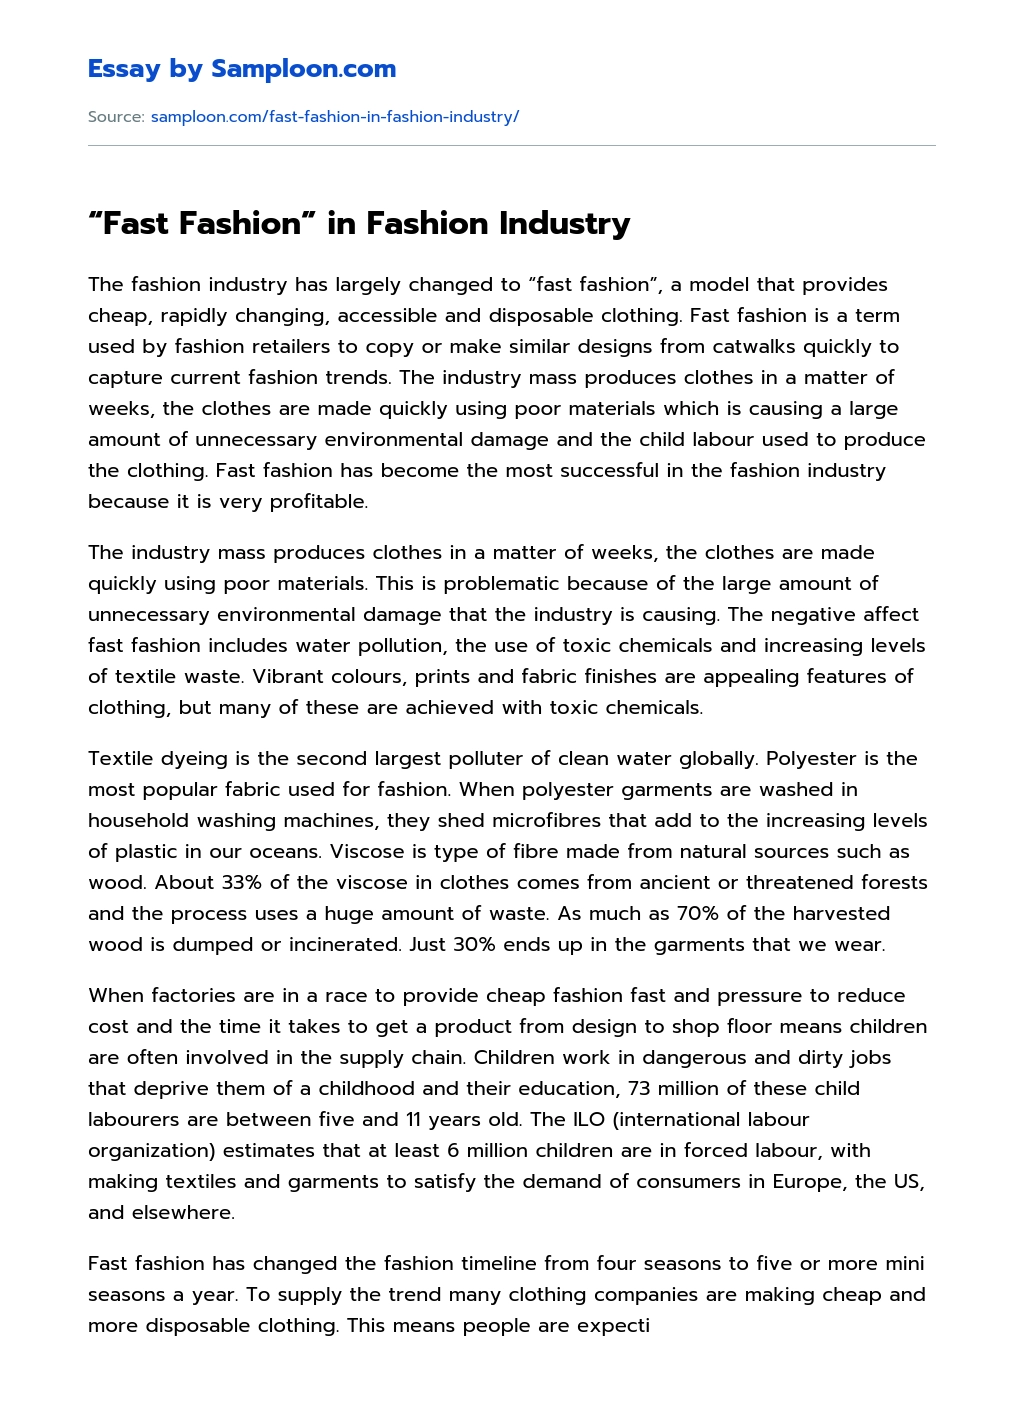 essay about the fashion industry